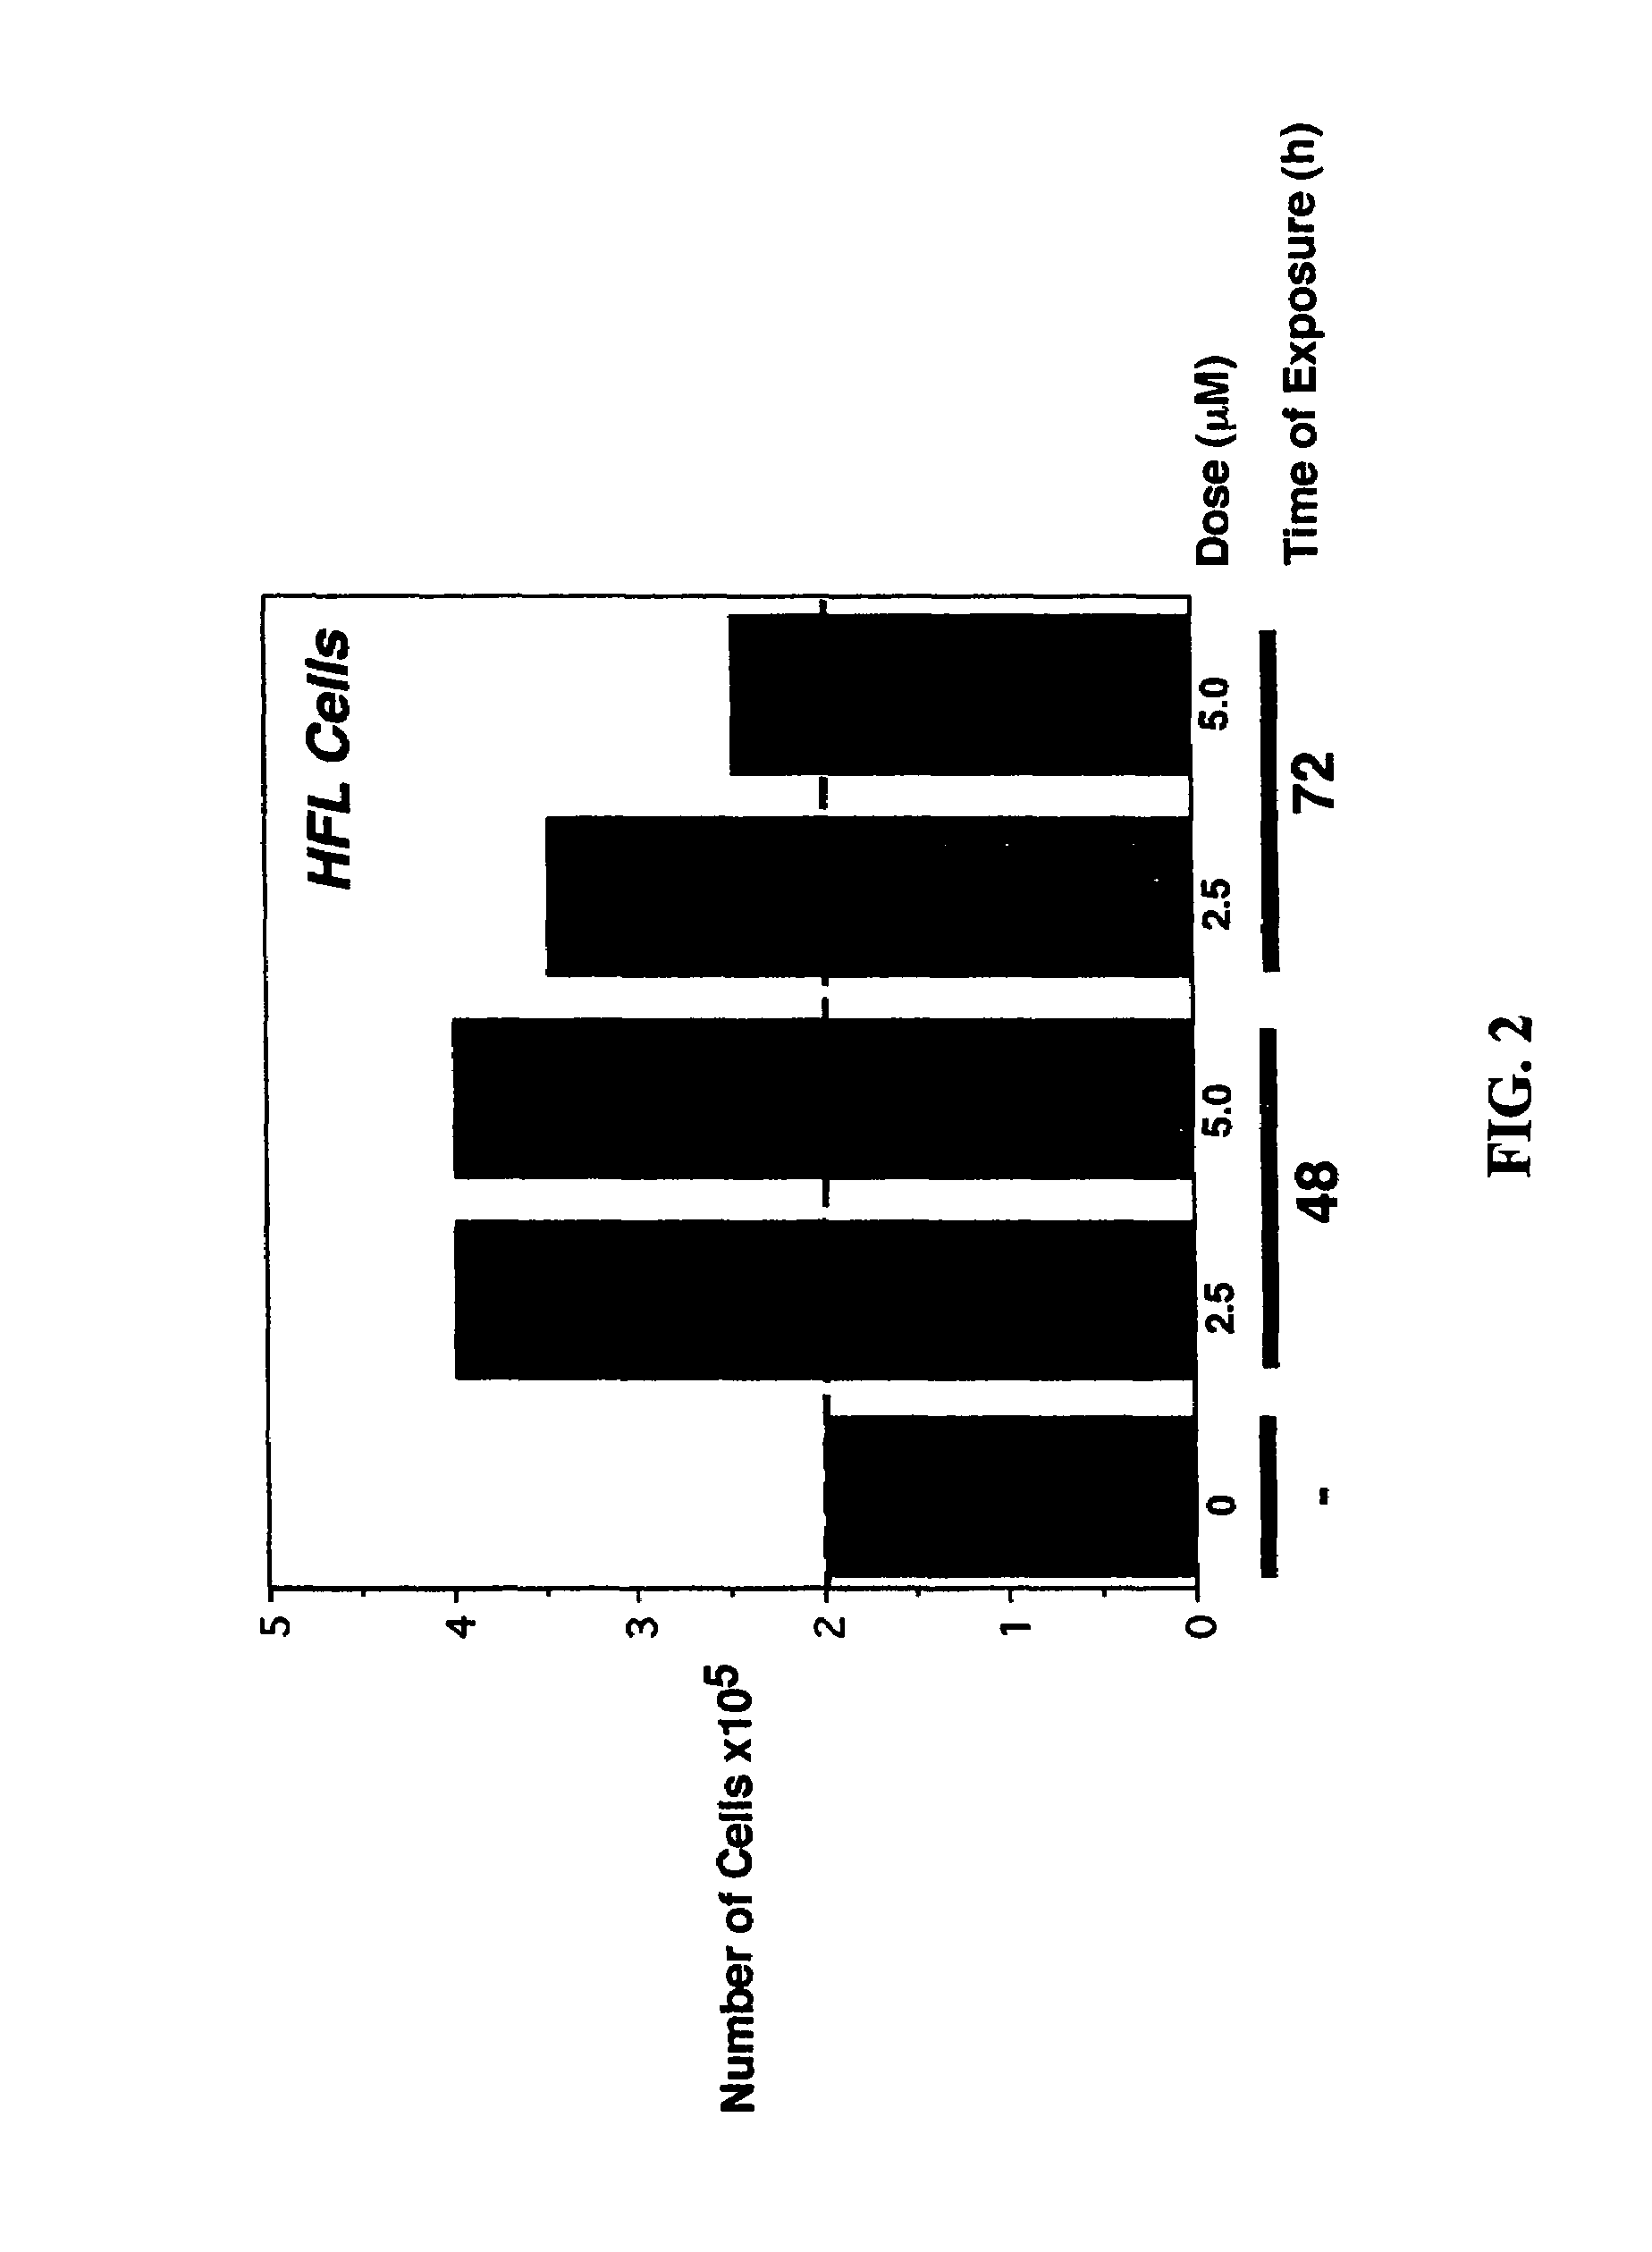 Method for protecting normal cells from cytotoxicity of chemotherapeutic agents